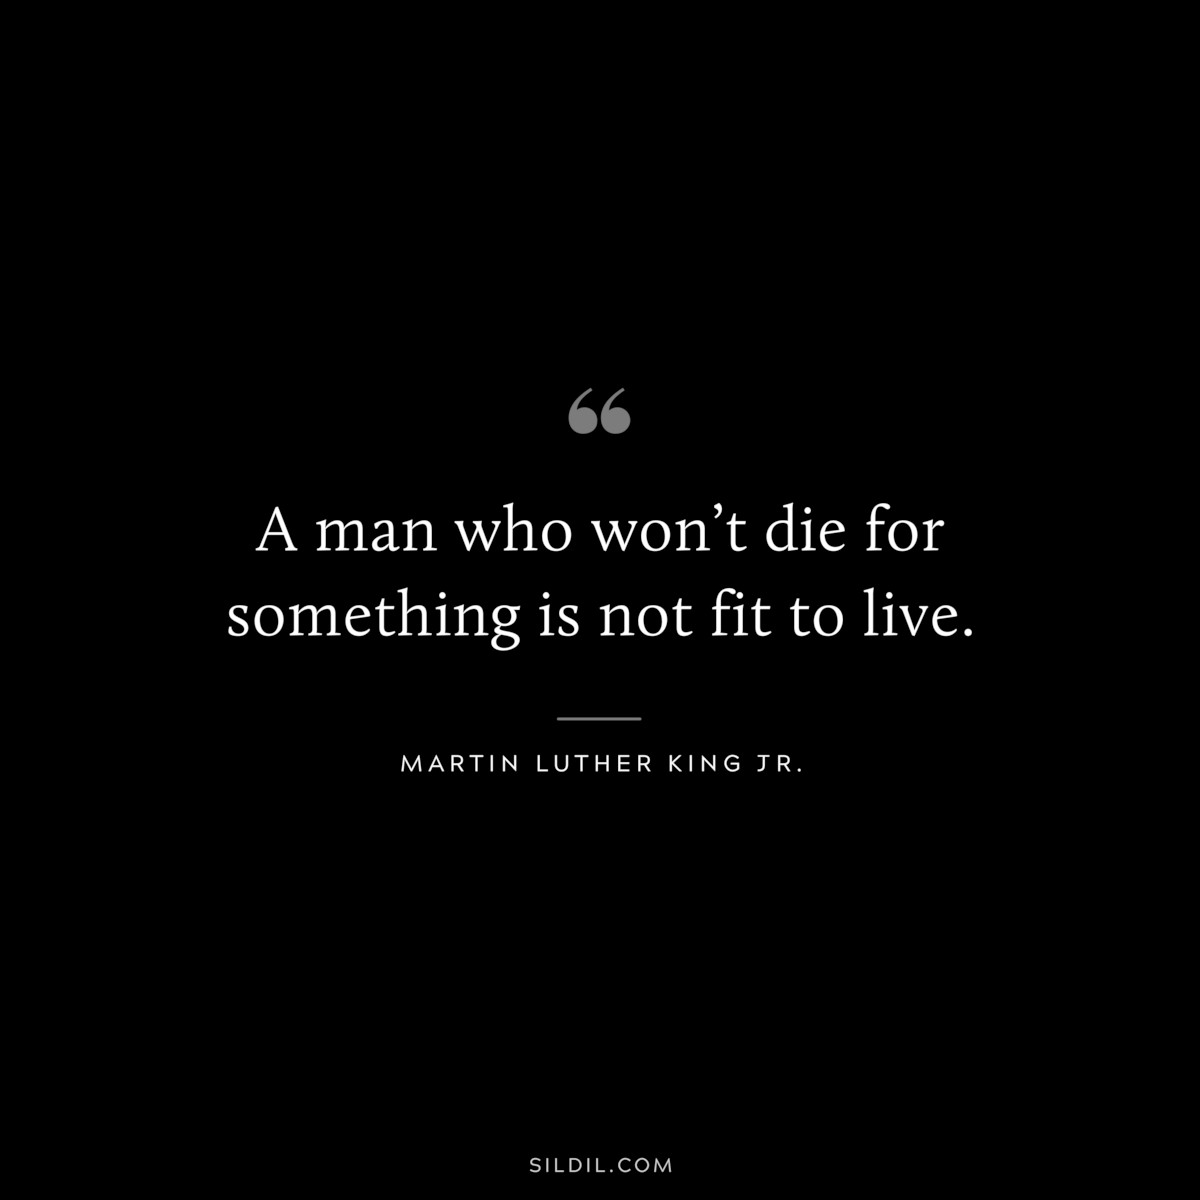 A man who won’t die for something is not fit to live. ― Martin Luther King Jr.